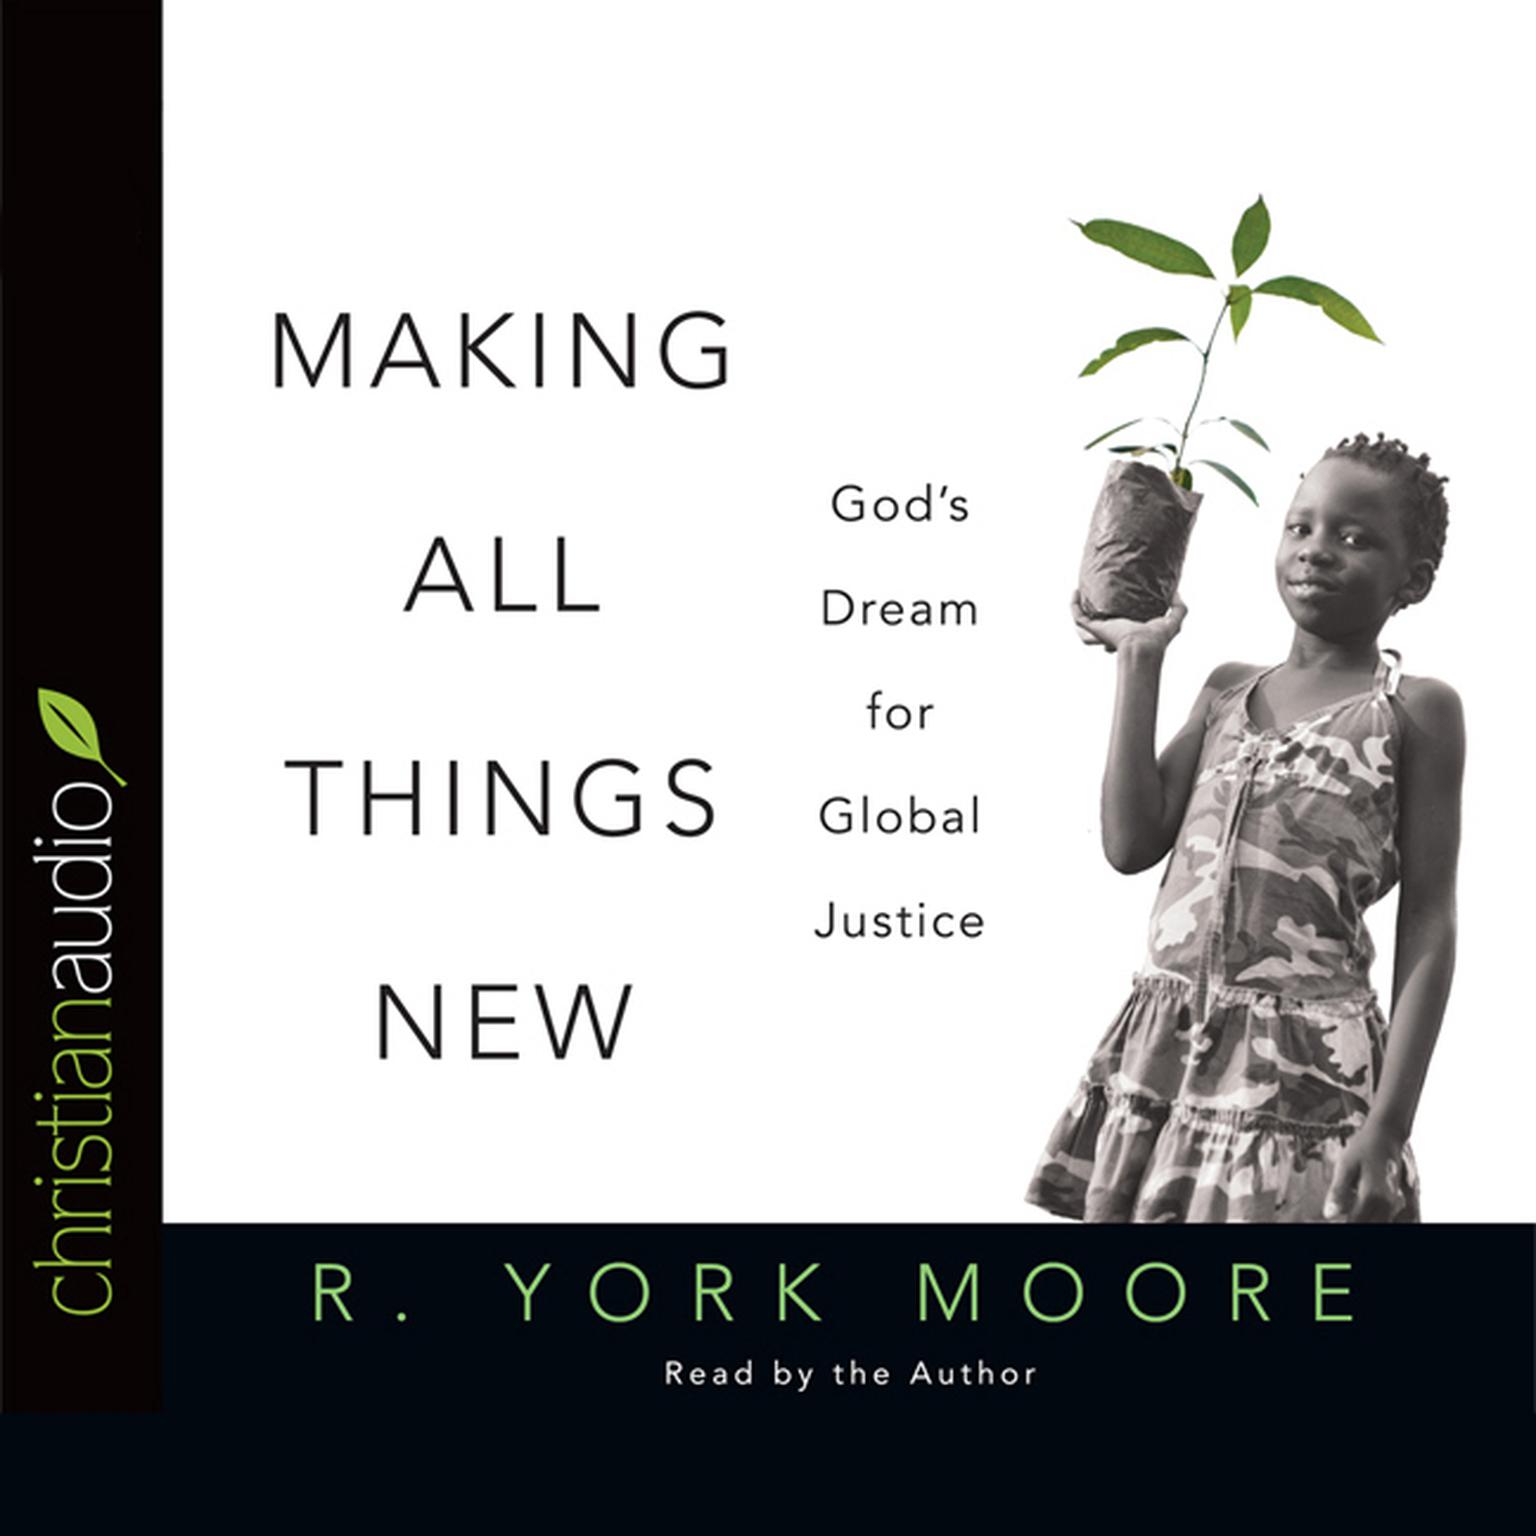 Making All Things New: Gods Dream for Global Justice Audiobook, by R. York Moore